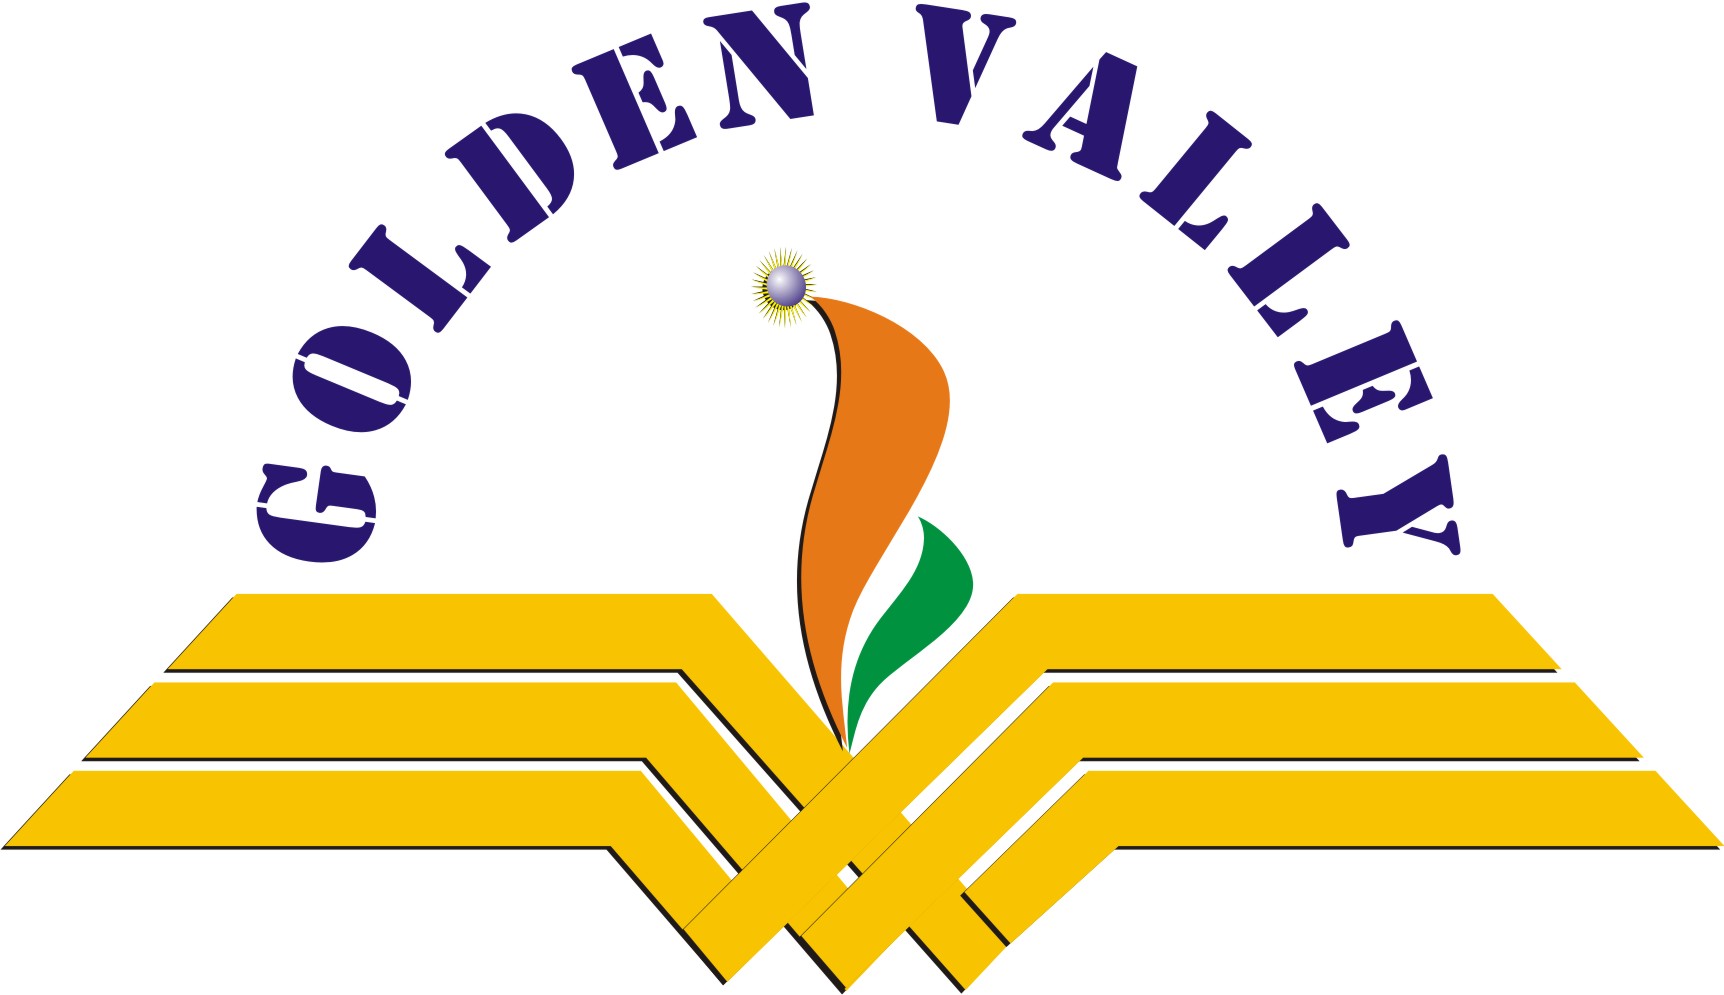 GOLDEN VALLEY INTEGRATED CAMPUS